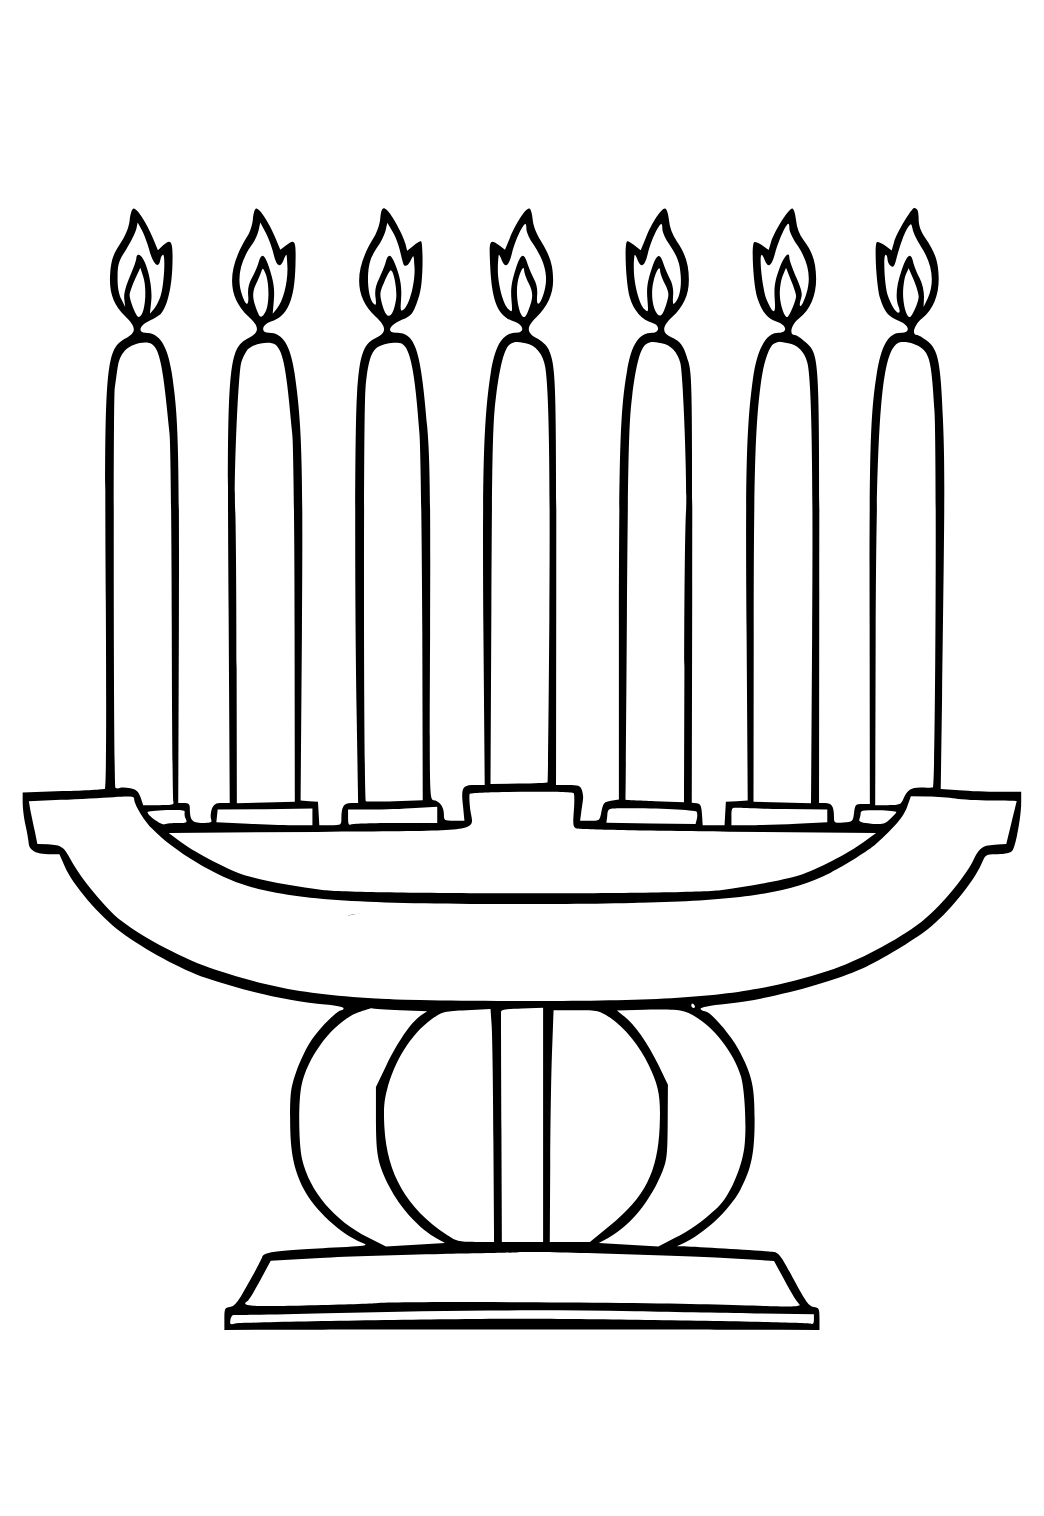 Free printable kwanzaa candles coloring page for adults and kids